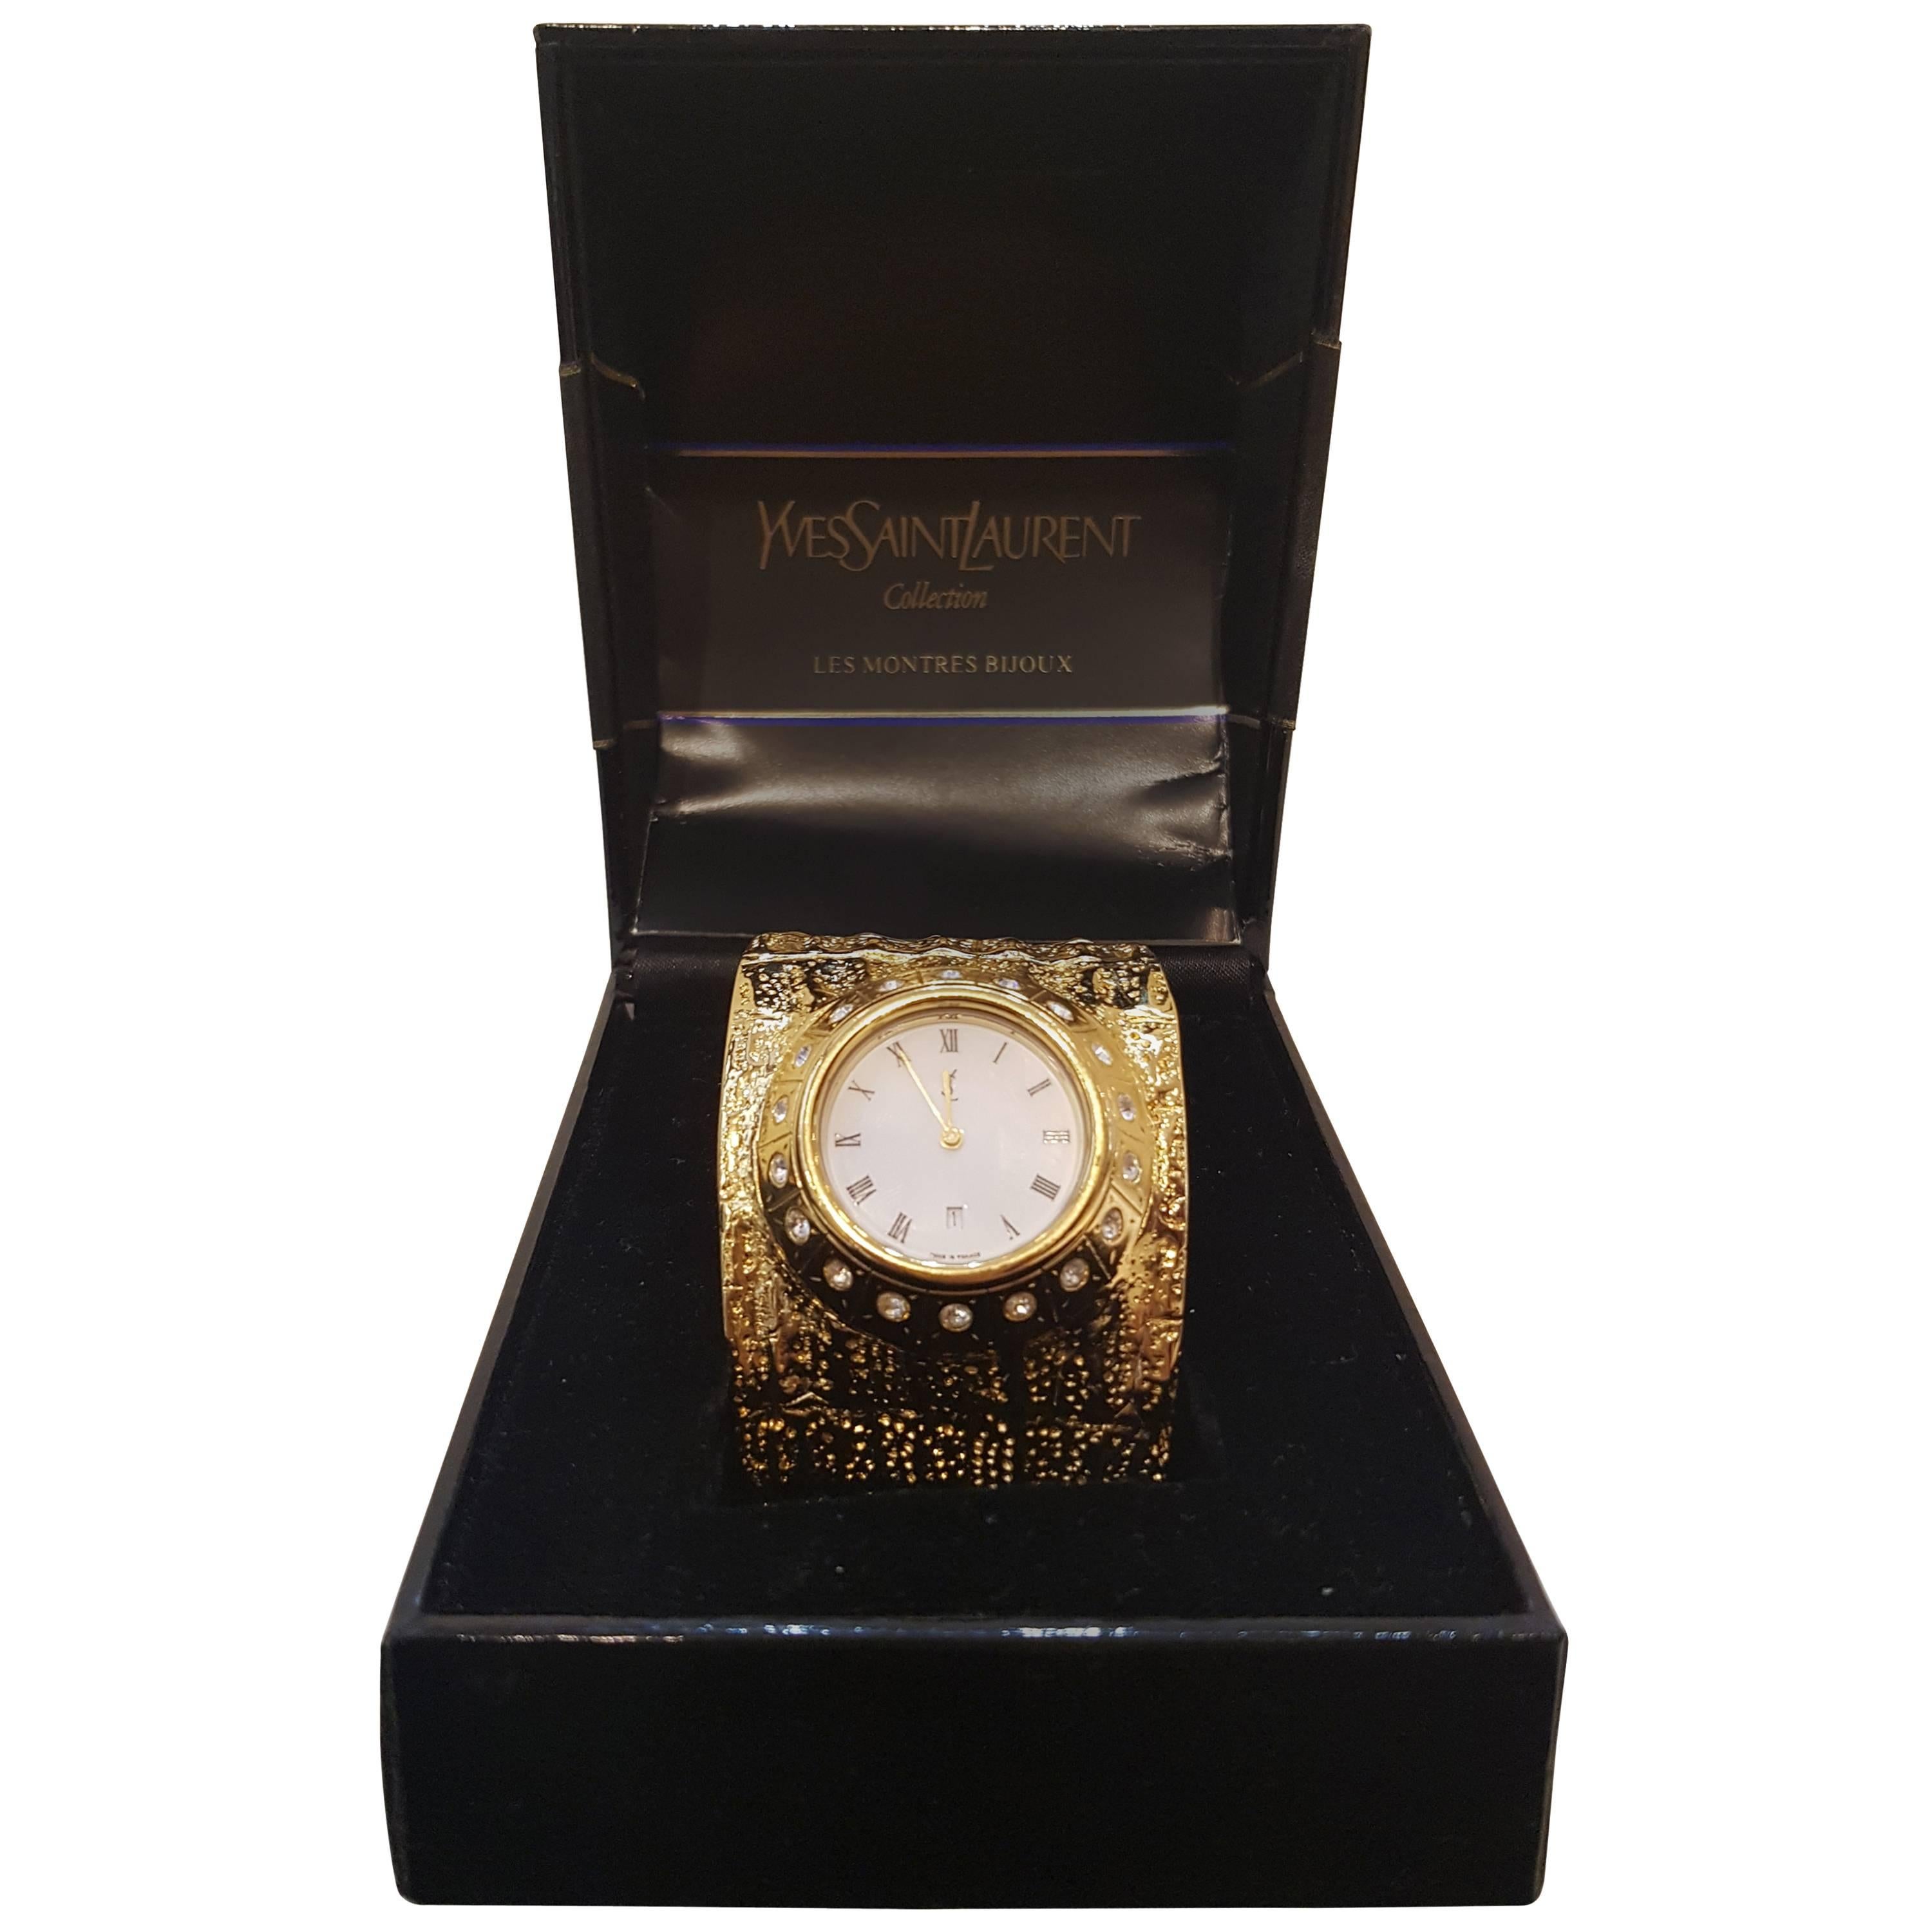 1990s Yves Saint Laurent Collection gold tone watch